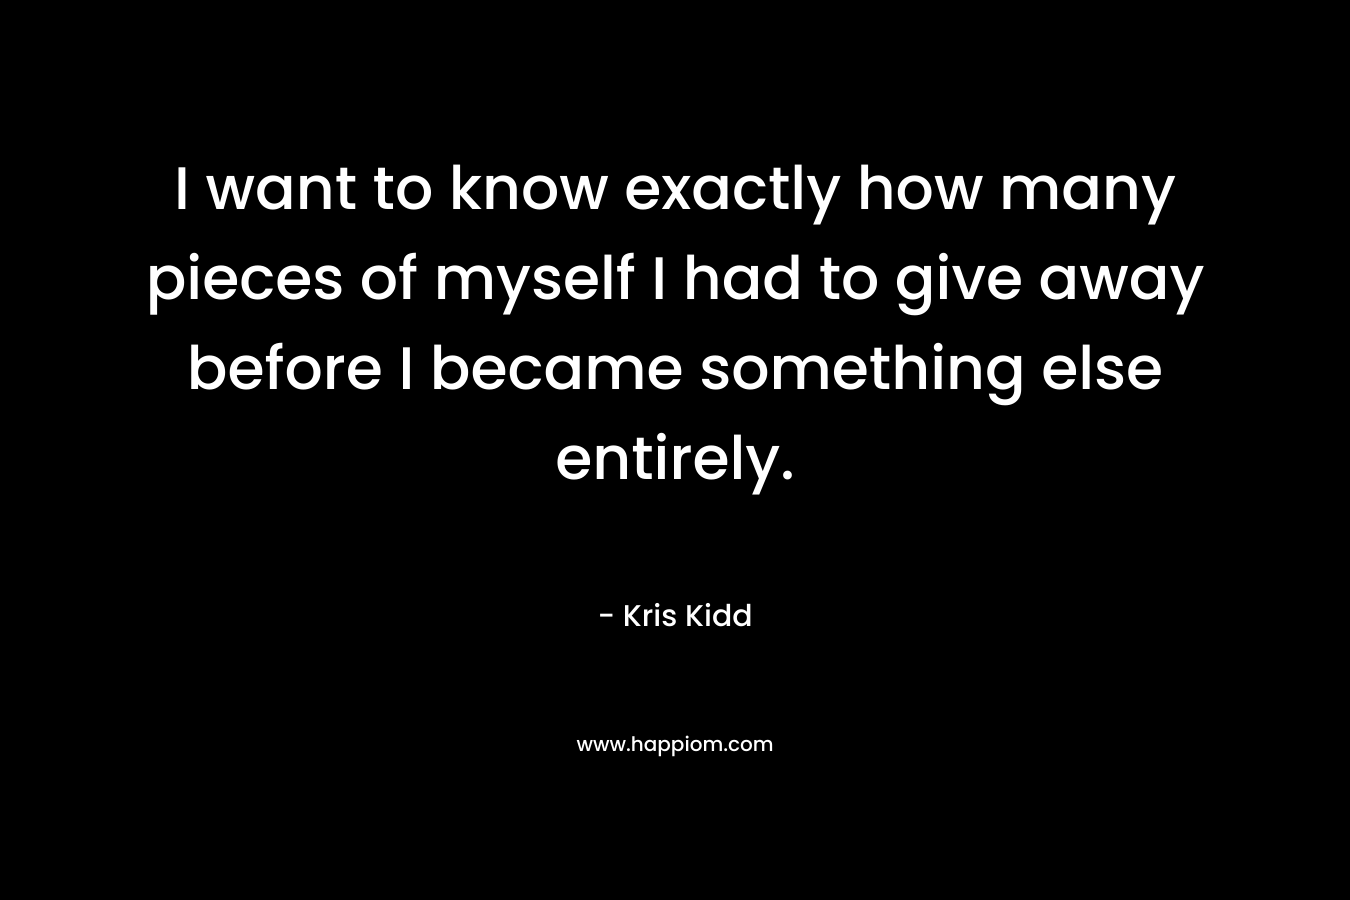 I want to know exactly how many pieces of myself I had to give away before I became something else entirely. – Kris Kidd